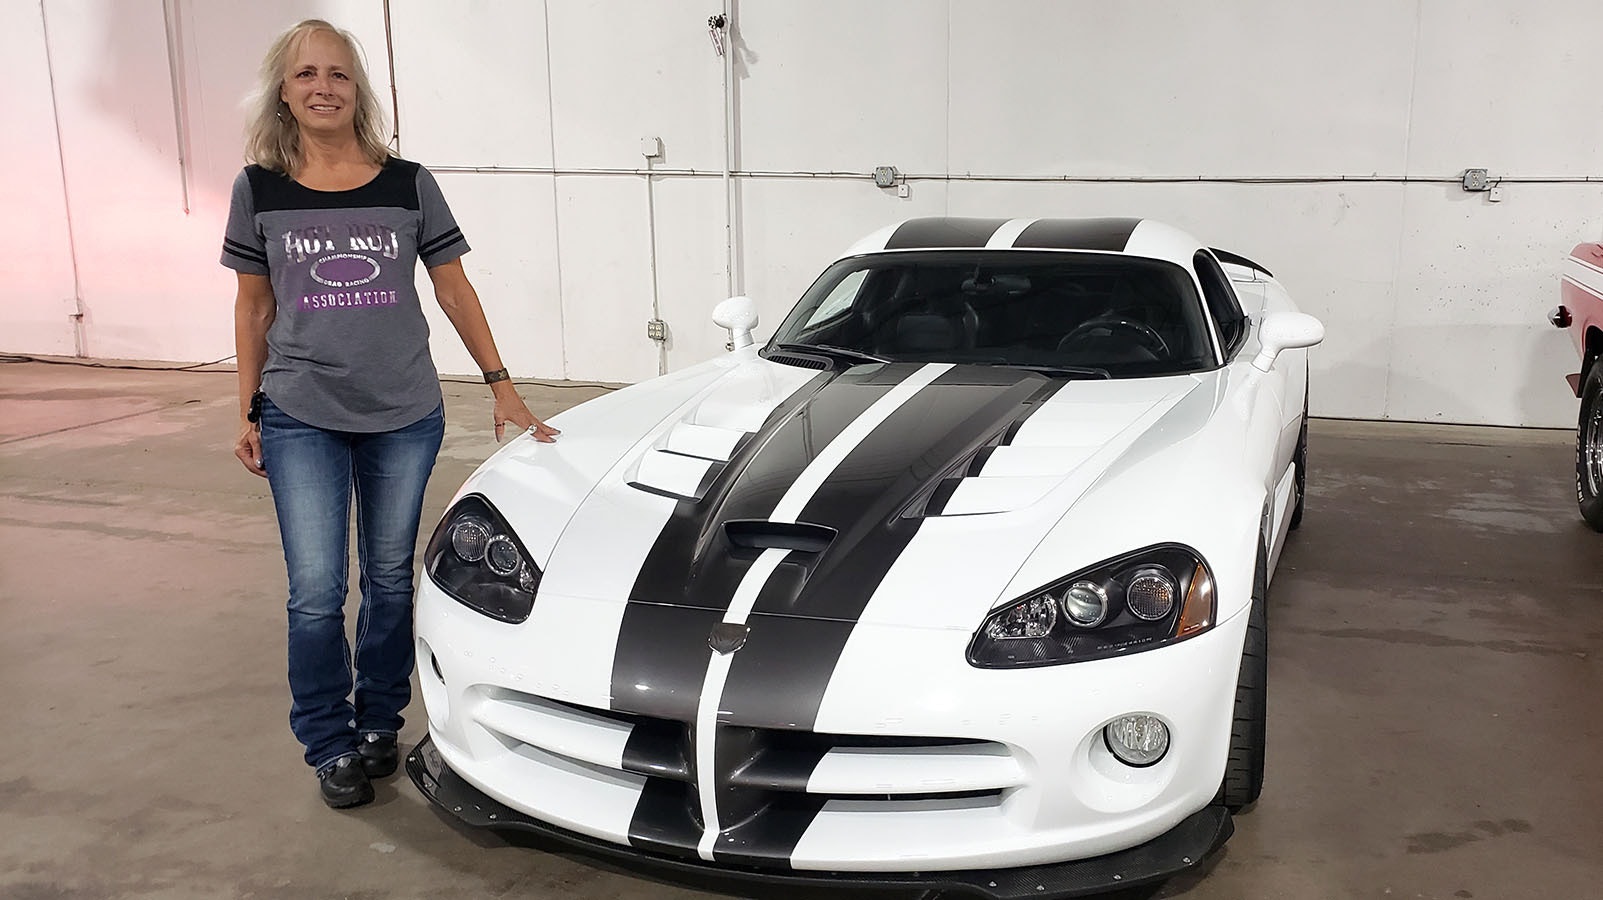 Desiree Hannabach with her dream car, a 2010 Dodge Viper.